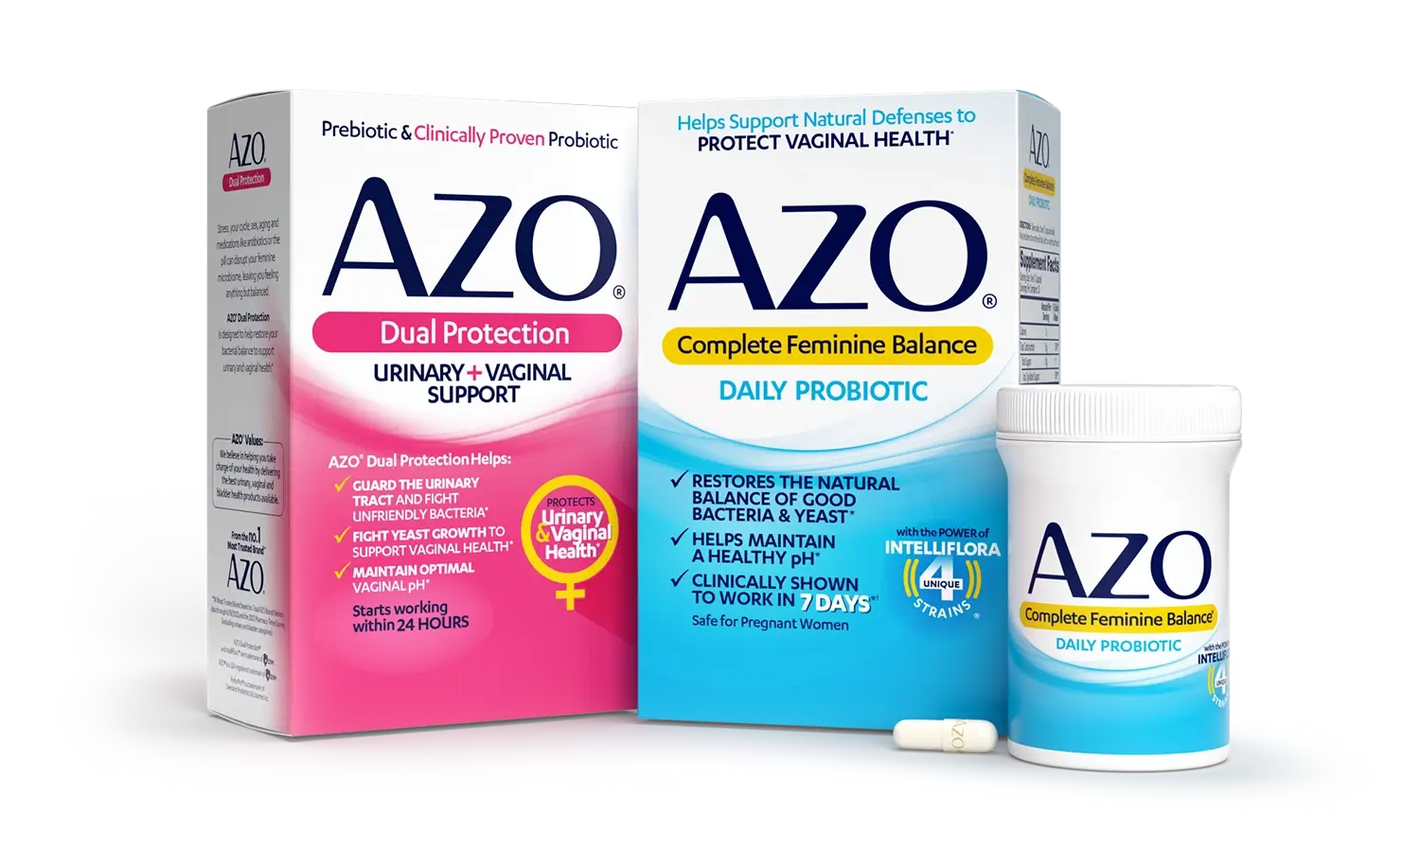 azo-vaginal-products-protect-dual-protection-complete-feminine-balance